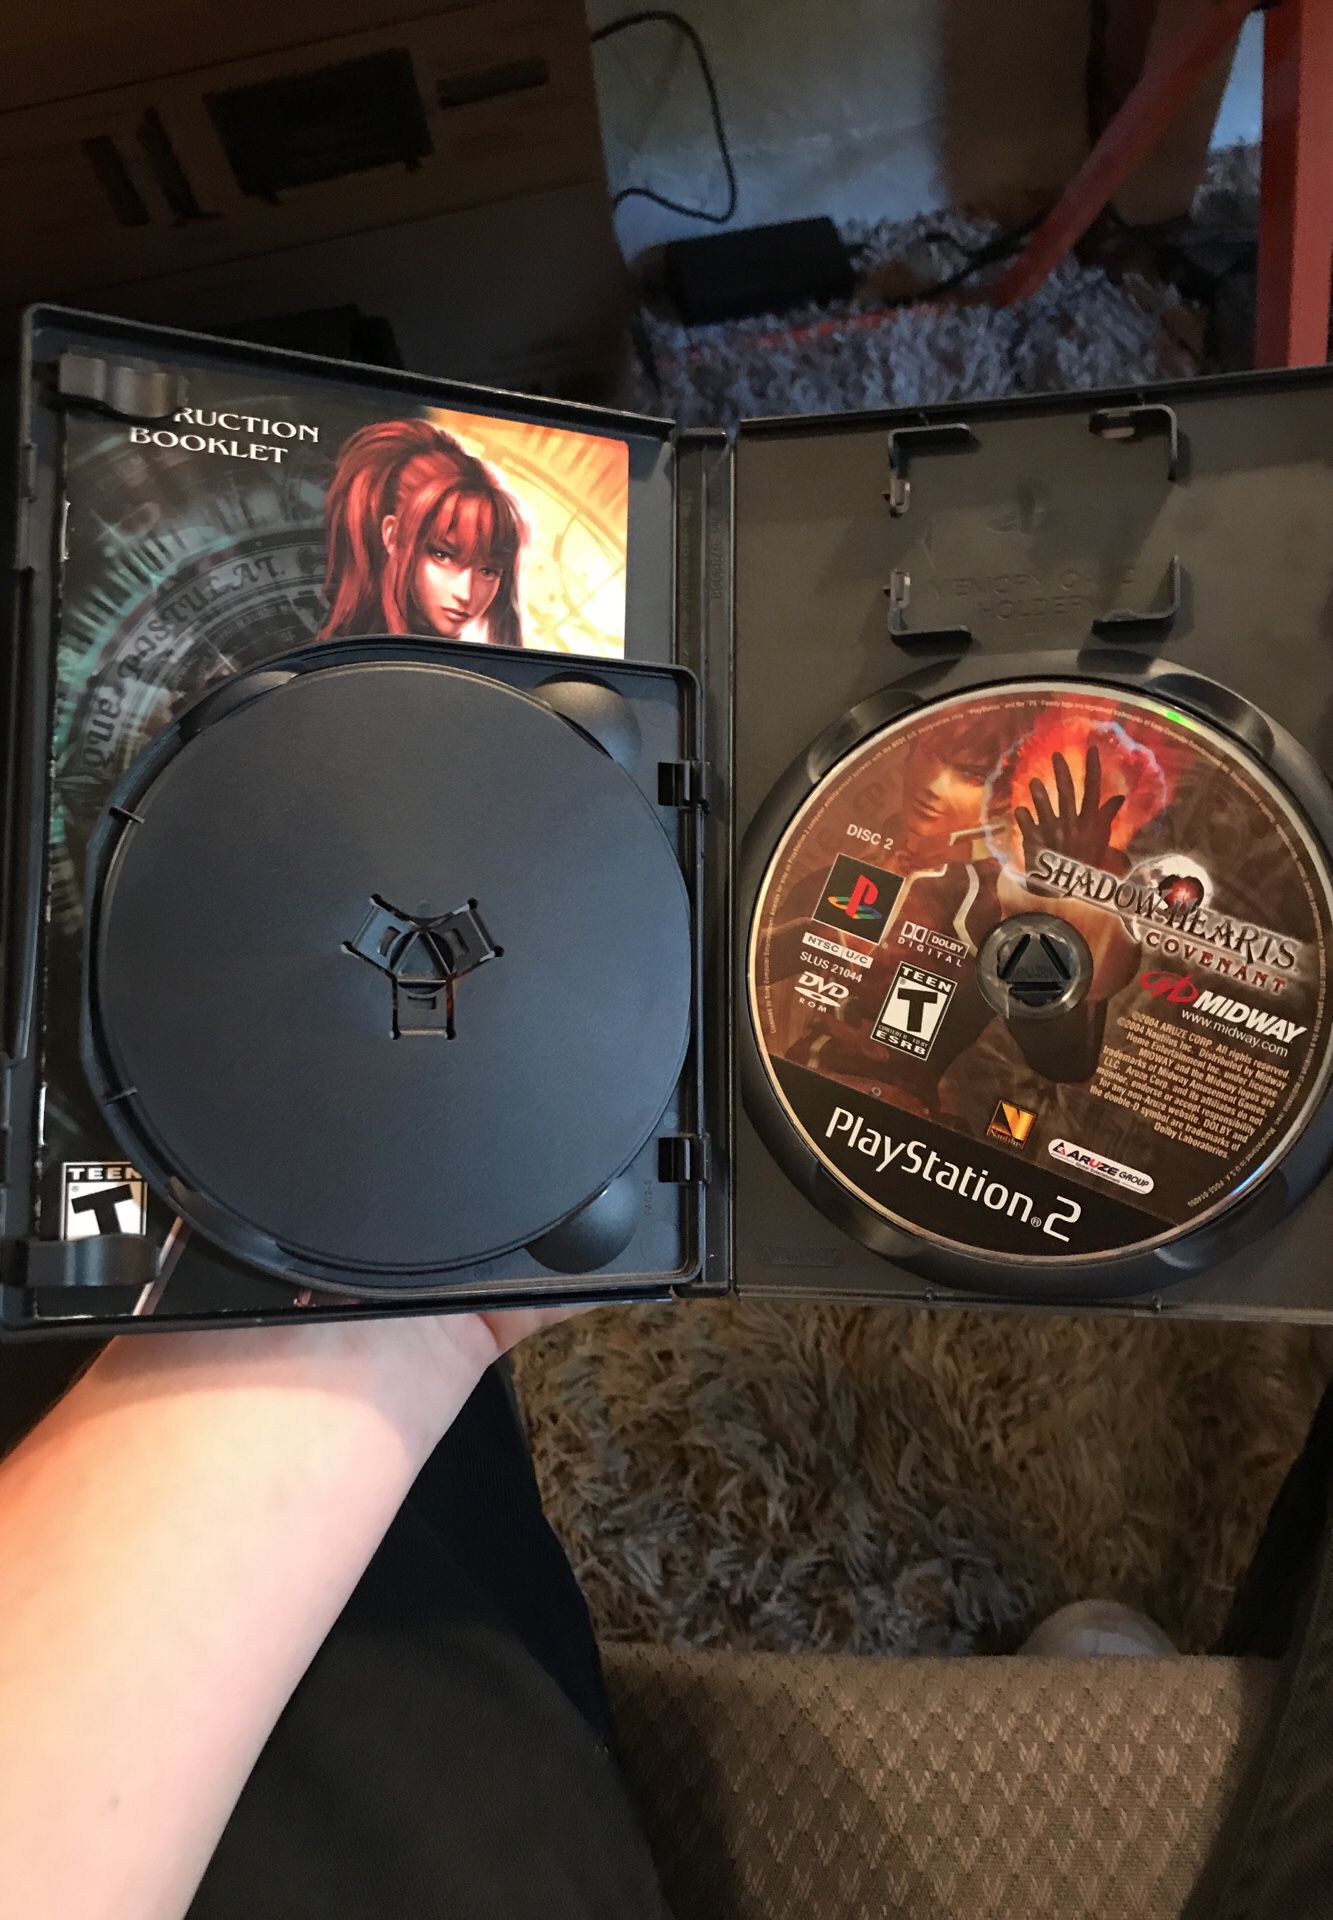 Shadow Hearts: Covenant (Sony PlayStation 2, 2004) PS2 Disc 1 Only (POST  NINTENDO ERA) for Sale in Atlanta, GA - OfferUp